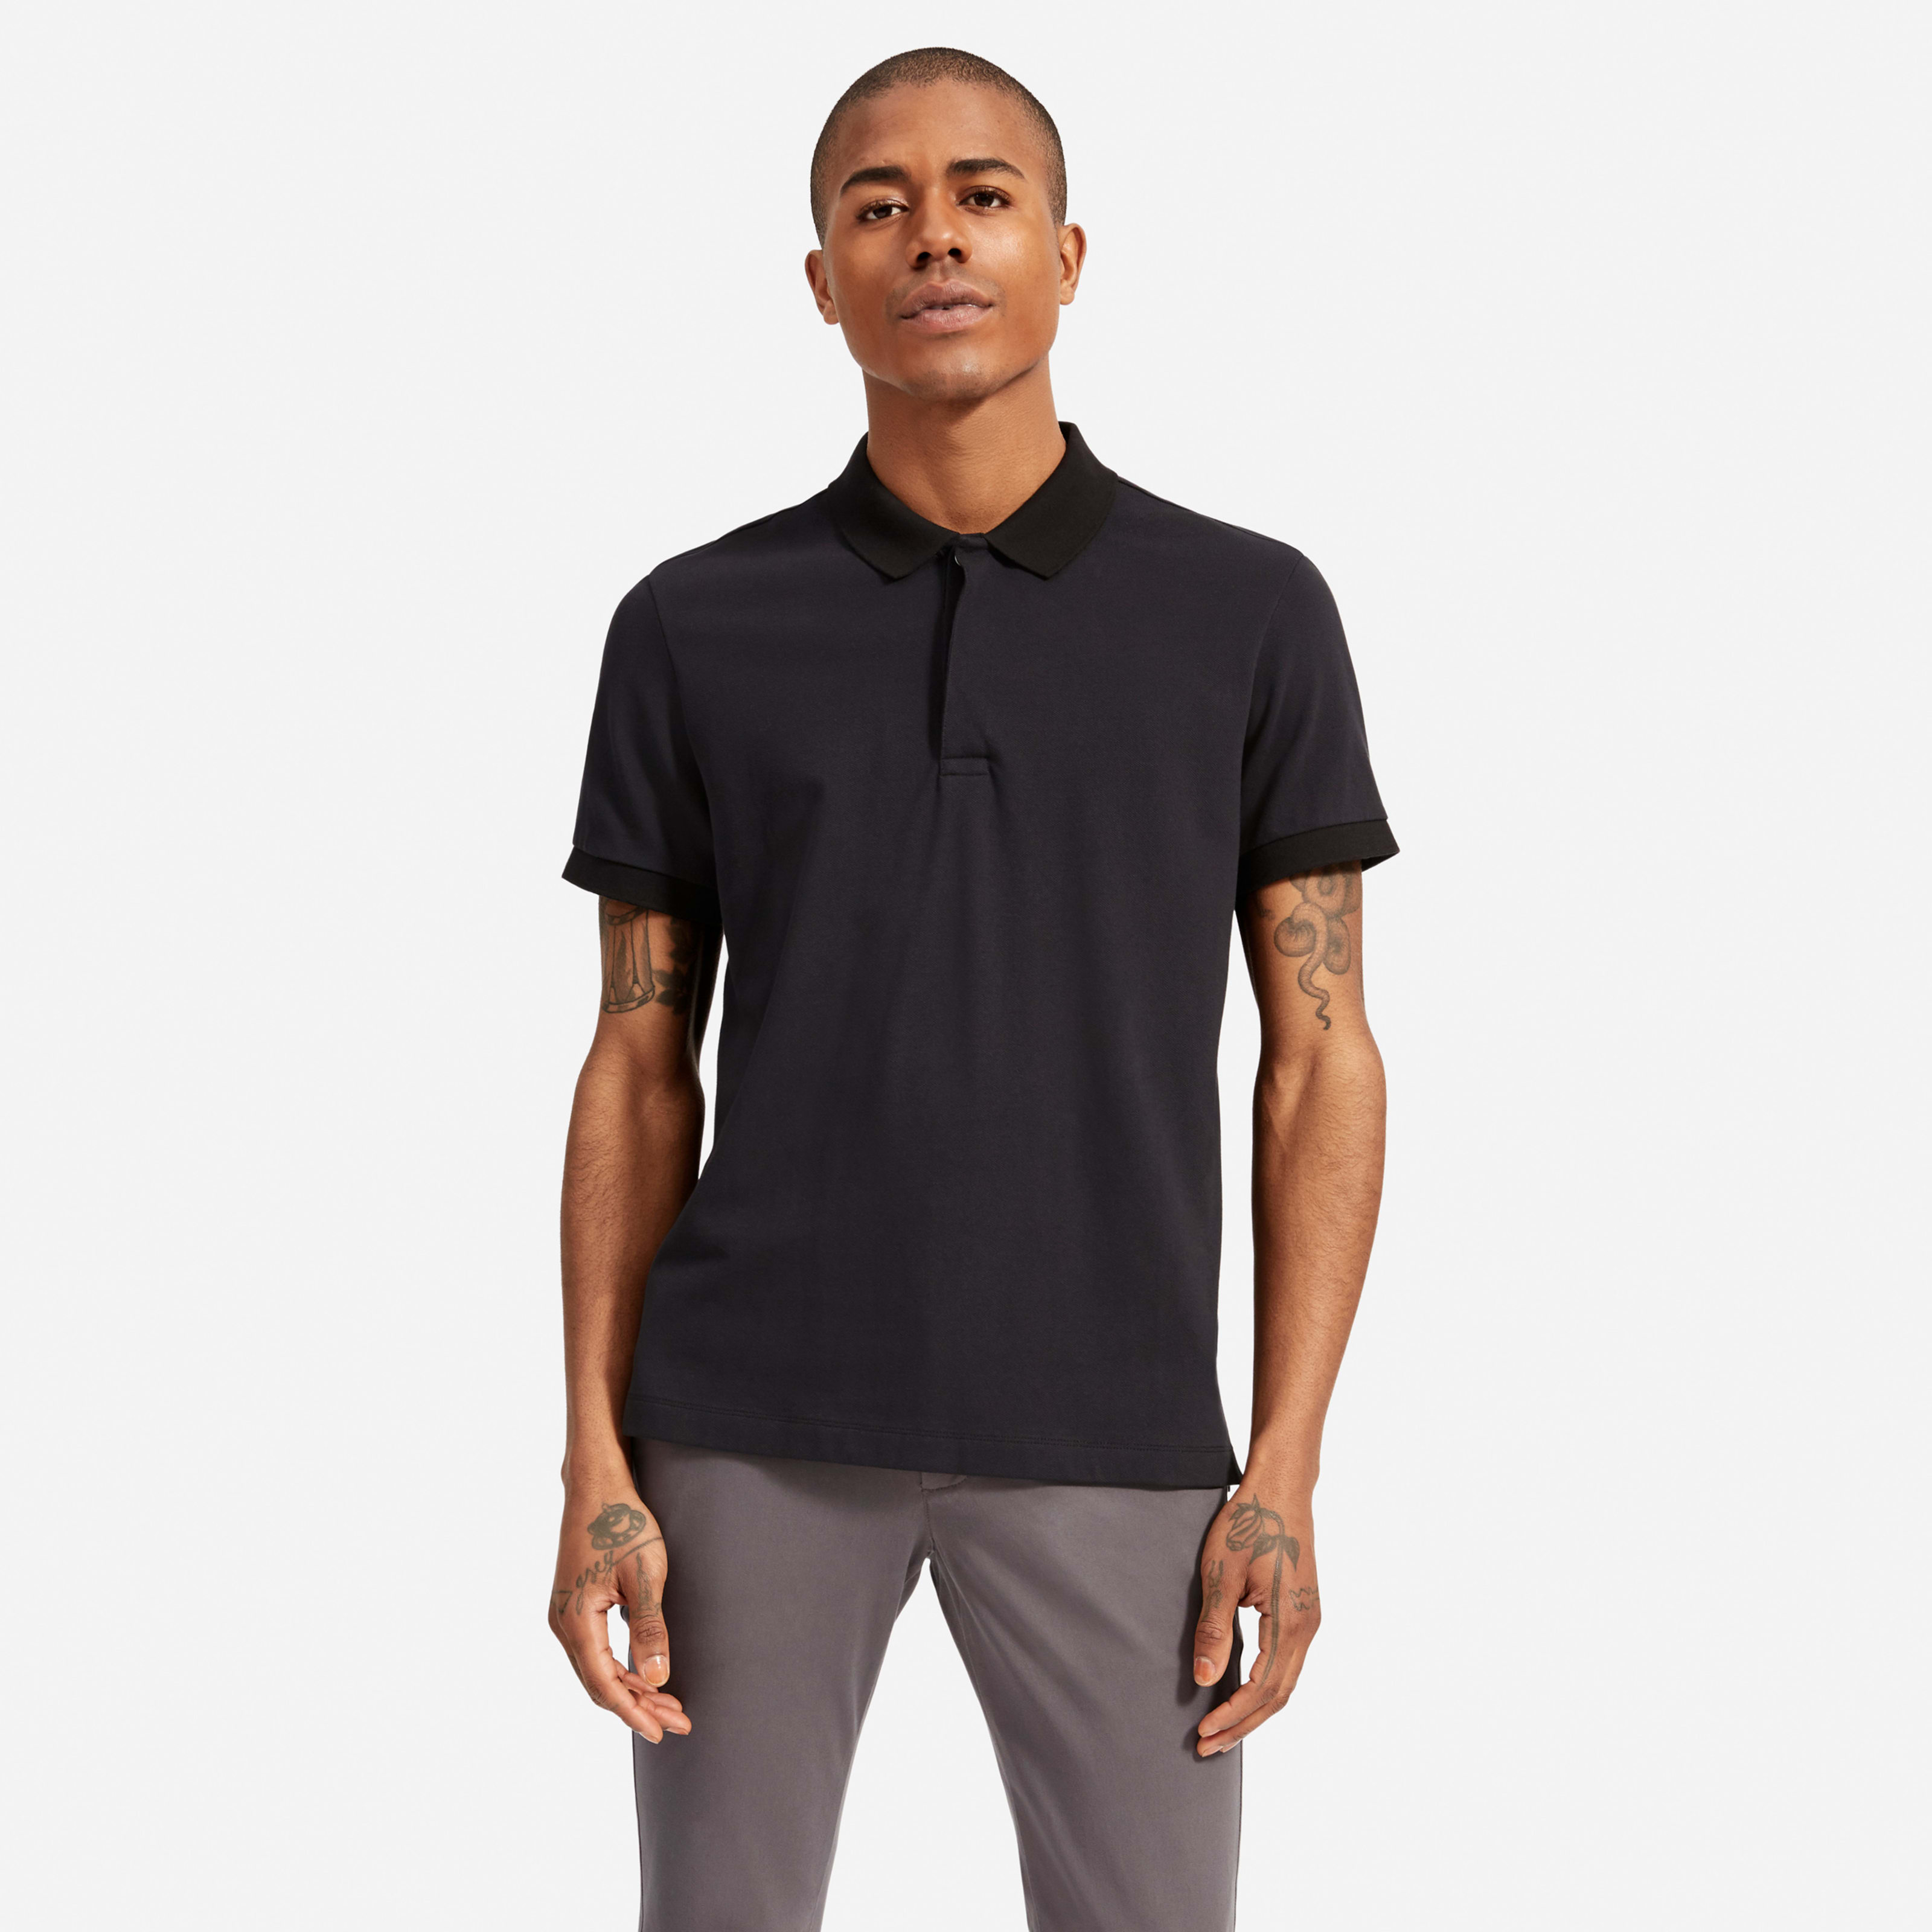 Men's Performance Polo T-Shirt By Everlane In Black, Size Xs